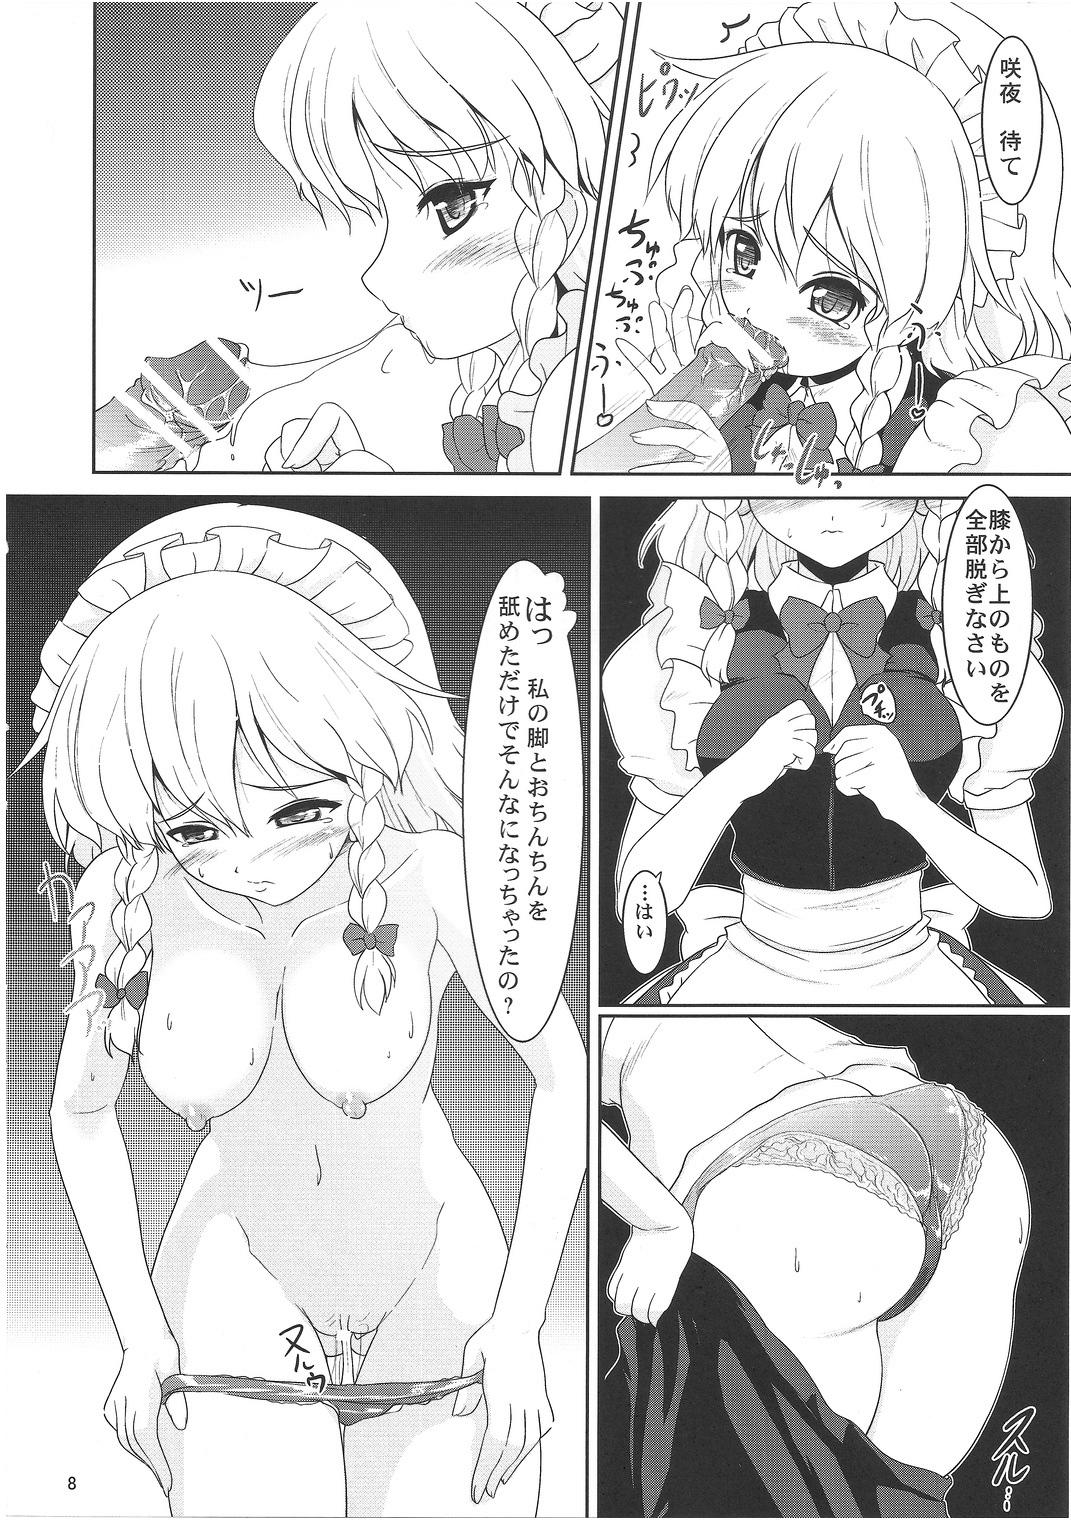 Hardcore Free Porn Maid or Dog - Touhou project Audition - Page 7